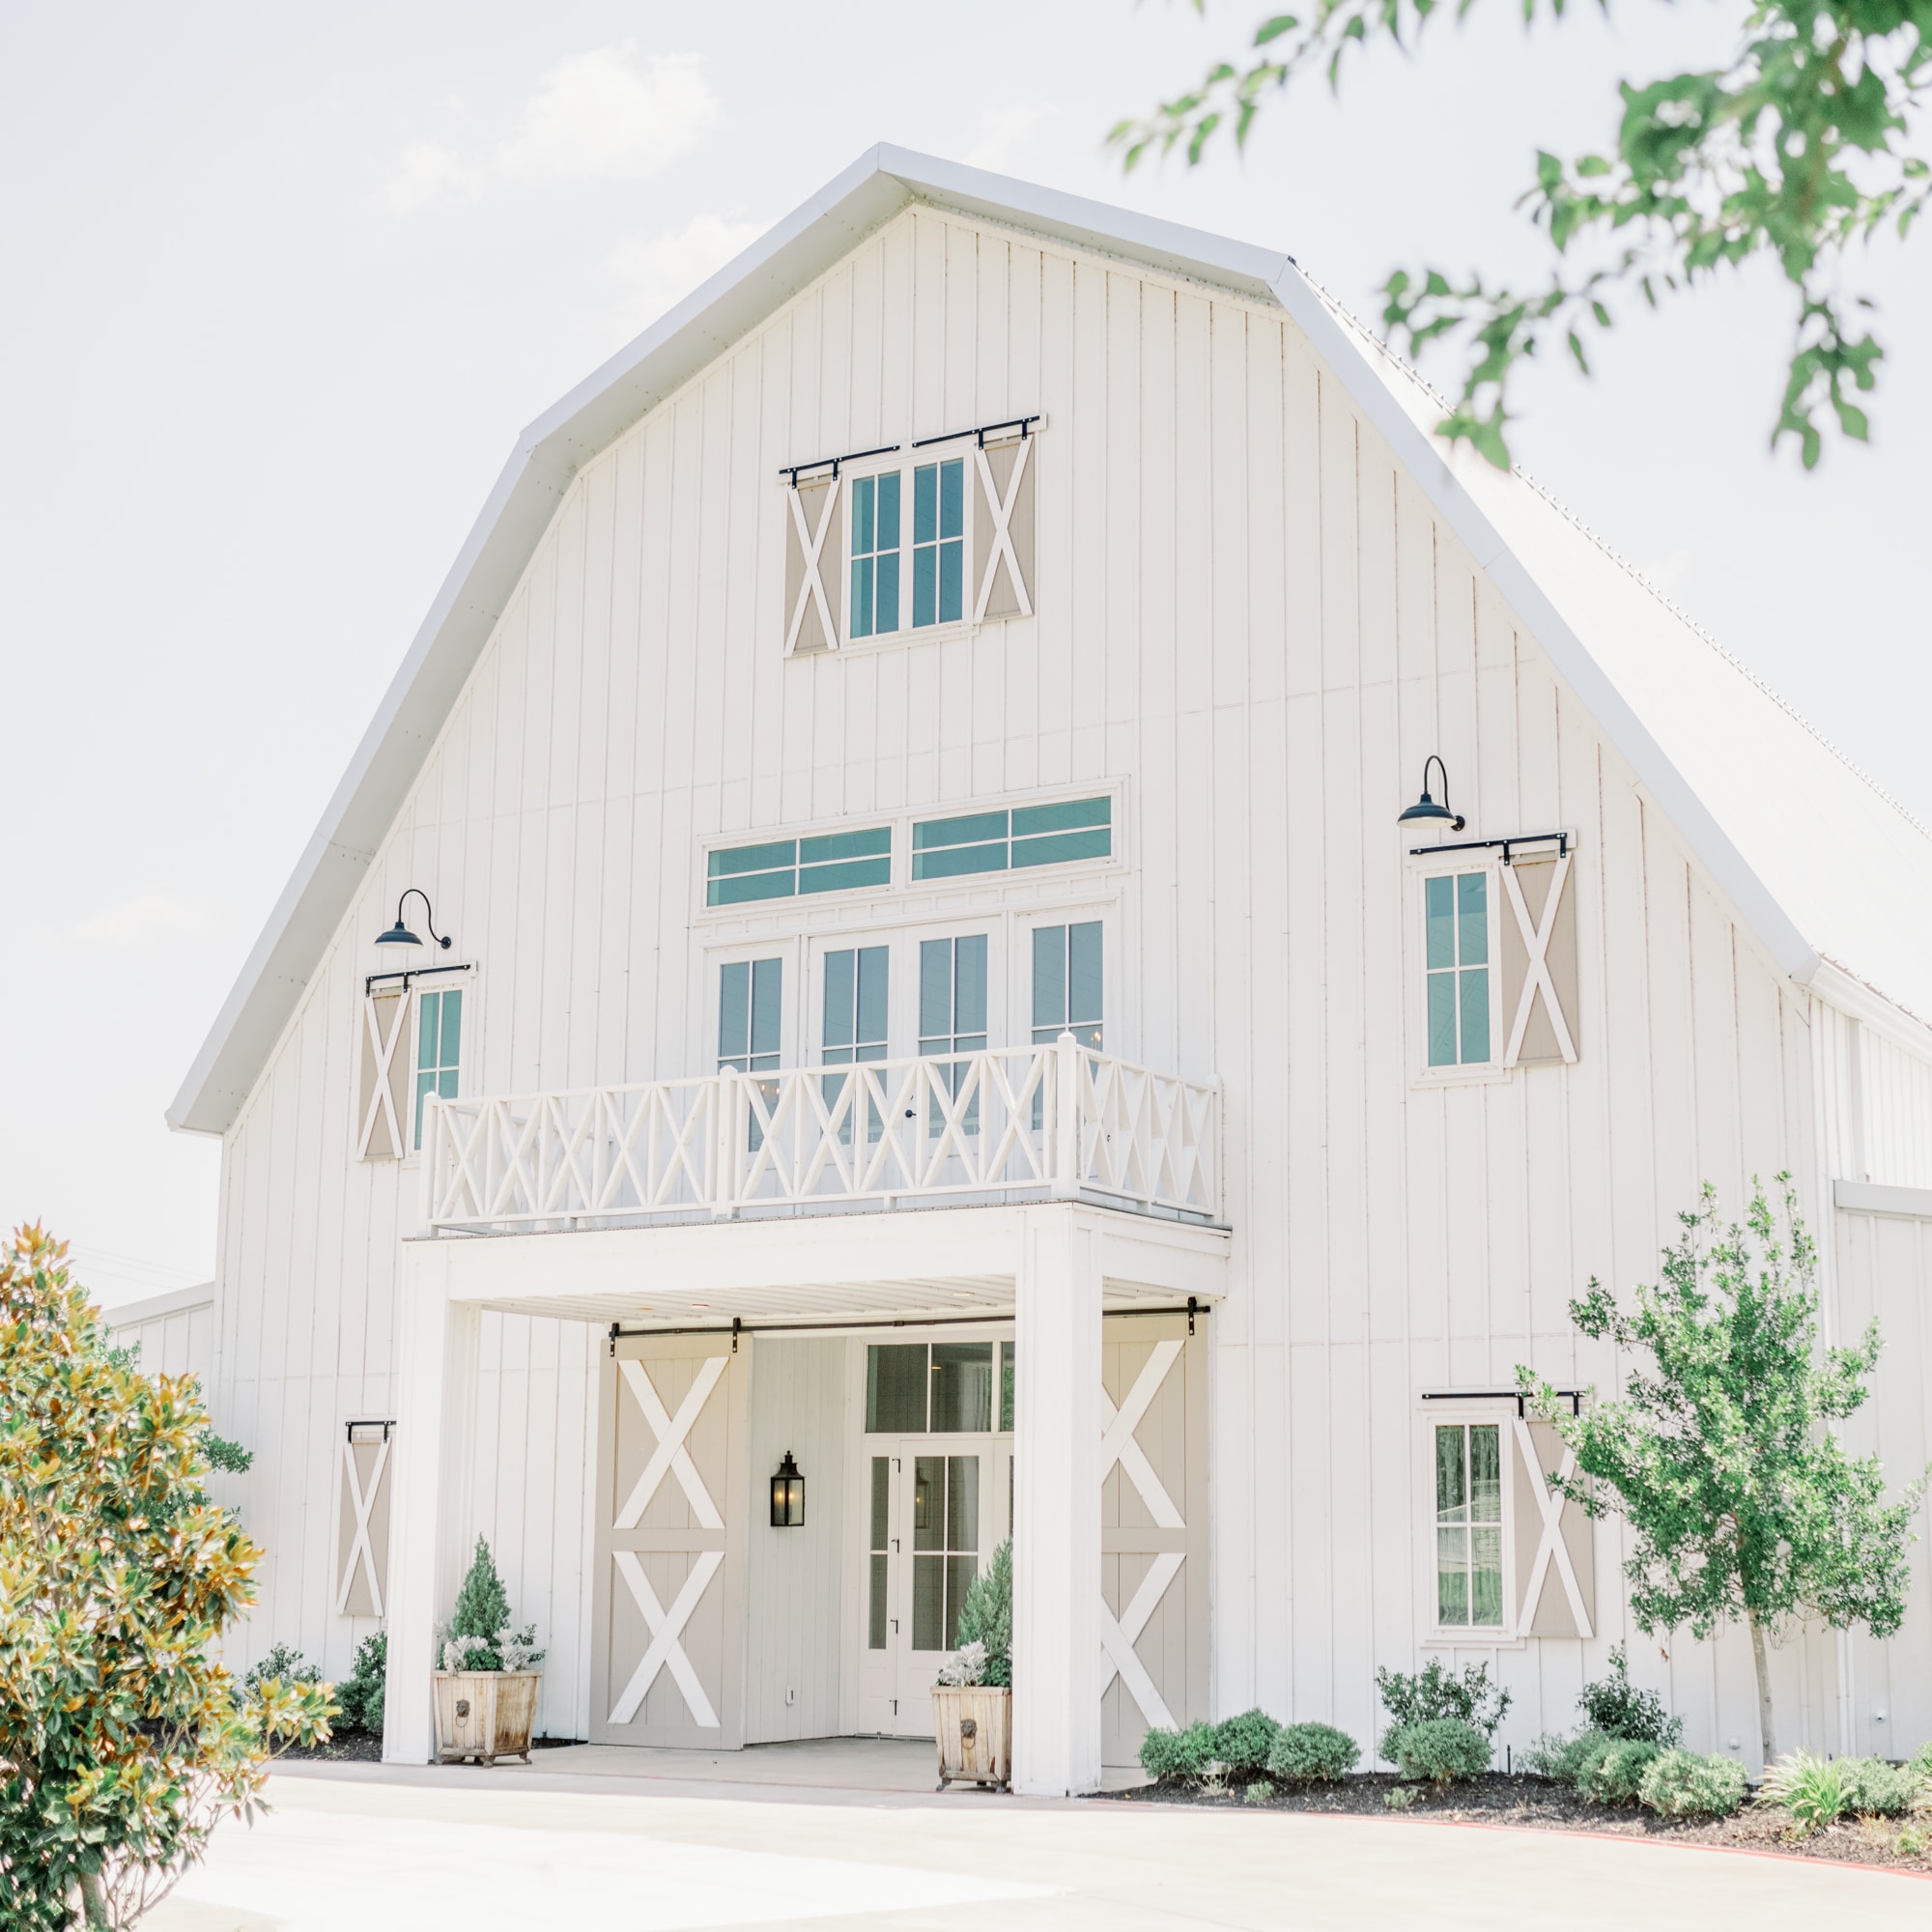 Exterior of the white barn at the Nest at Ruth Farms with windows and shutters.